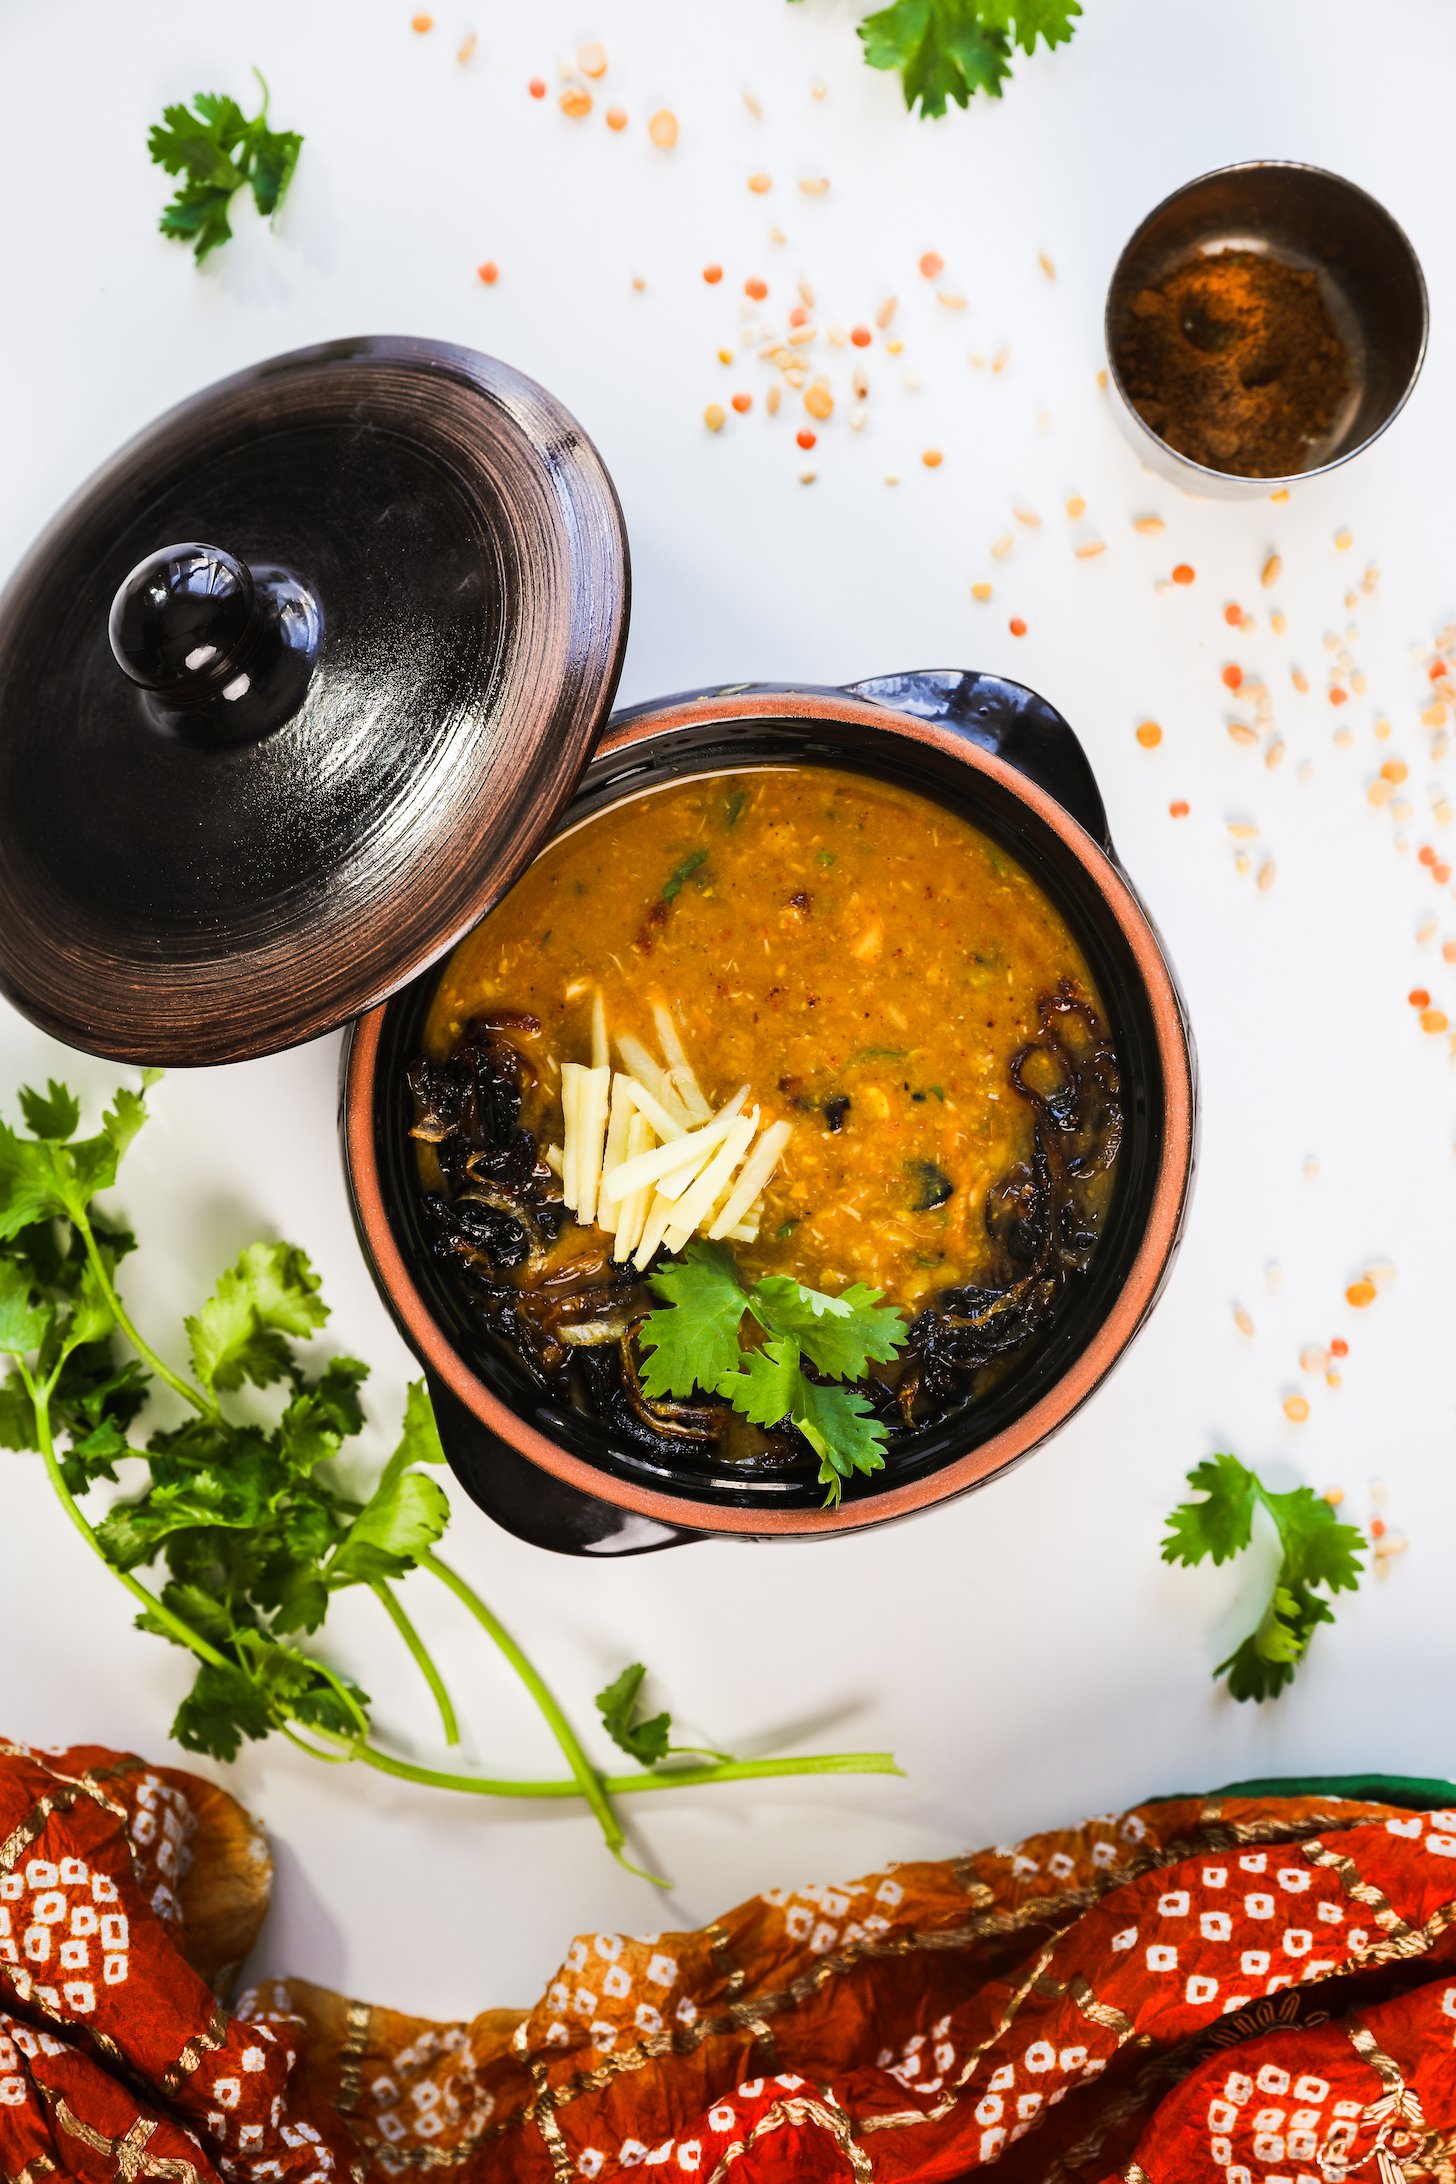 Birdseye image of a serving vessel with haleem, topped with fried onions, ginger strips, and cilantro leaves.